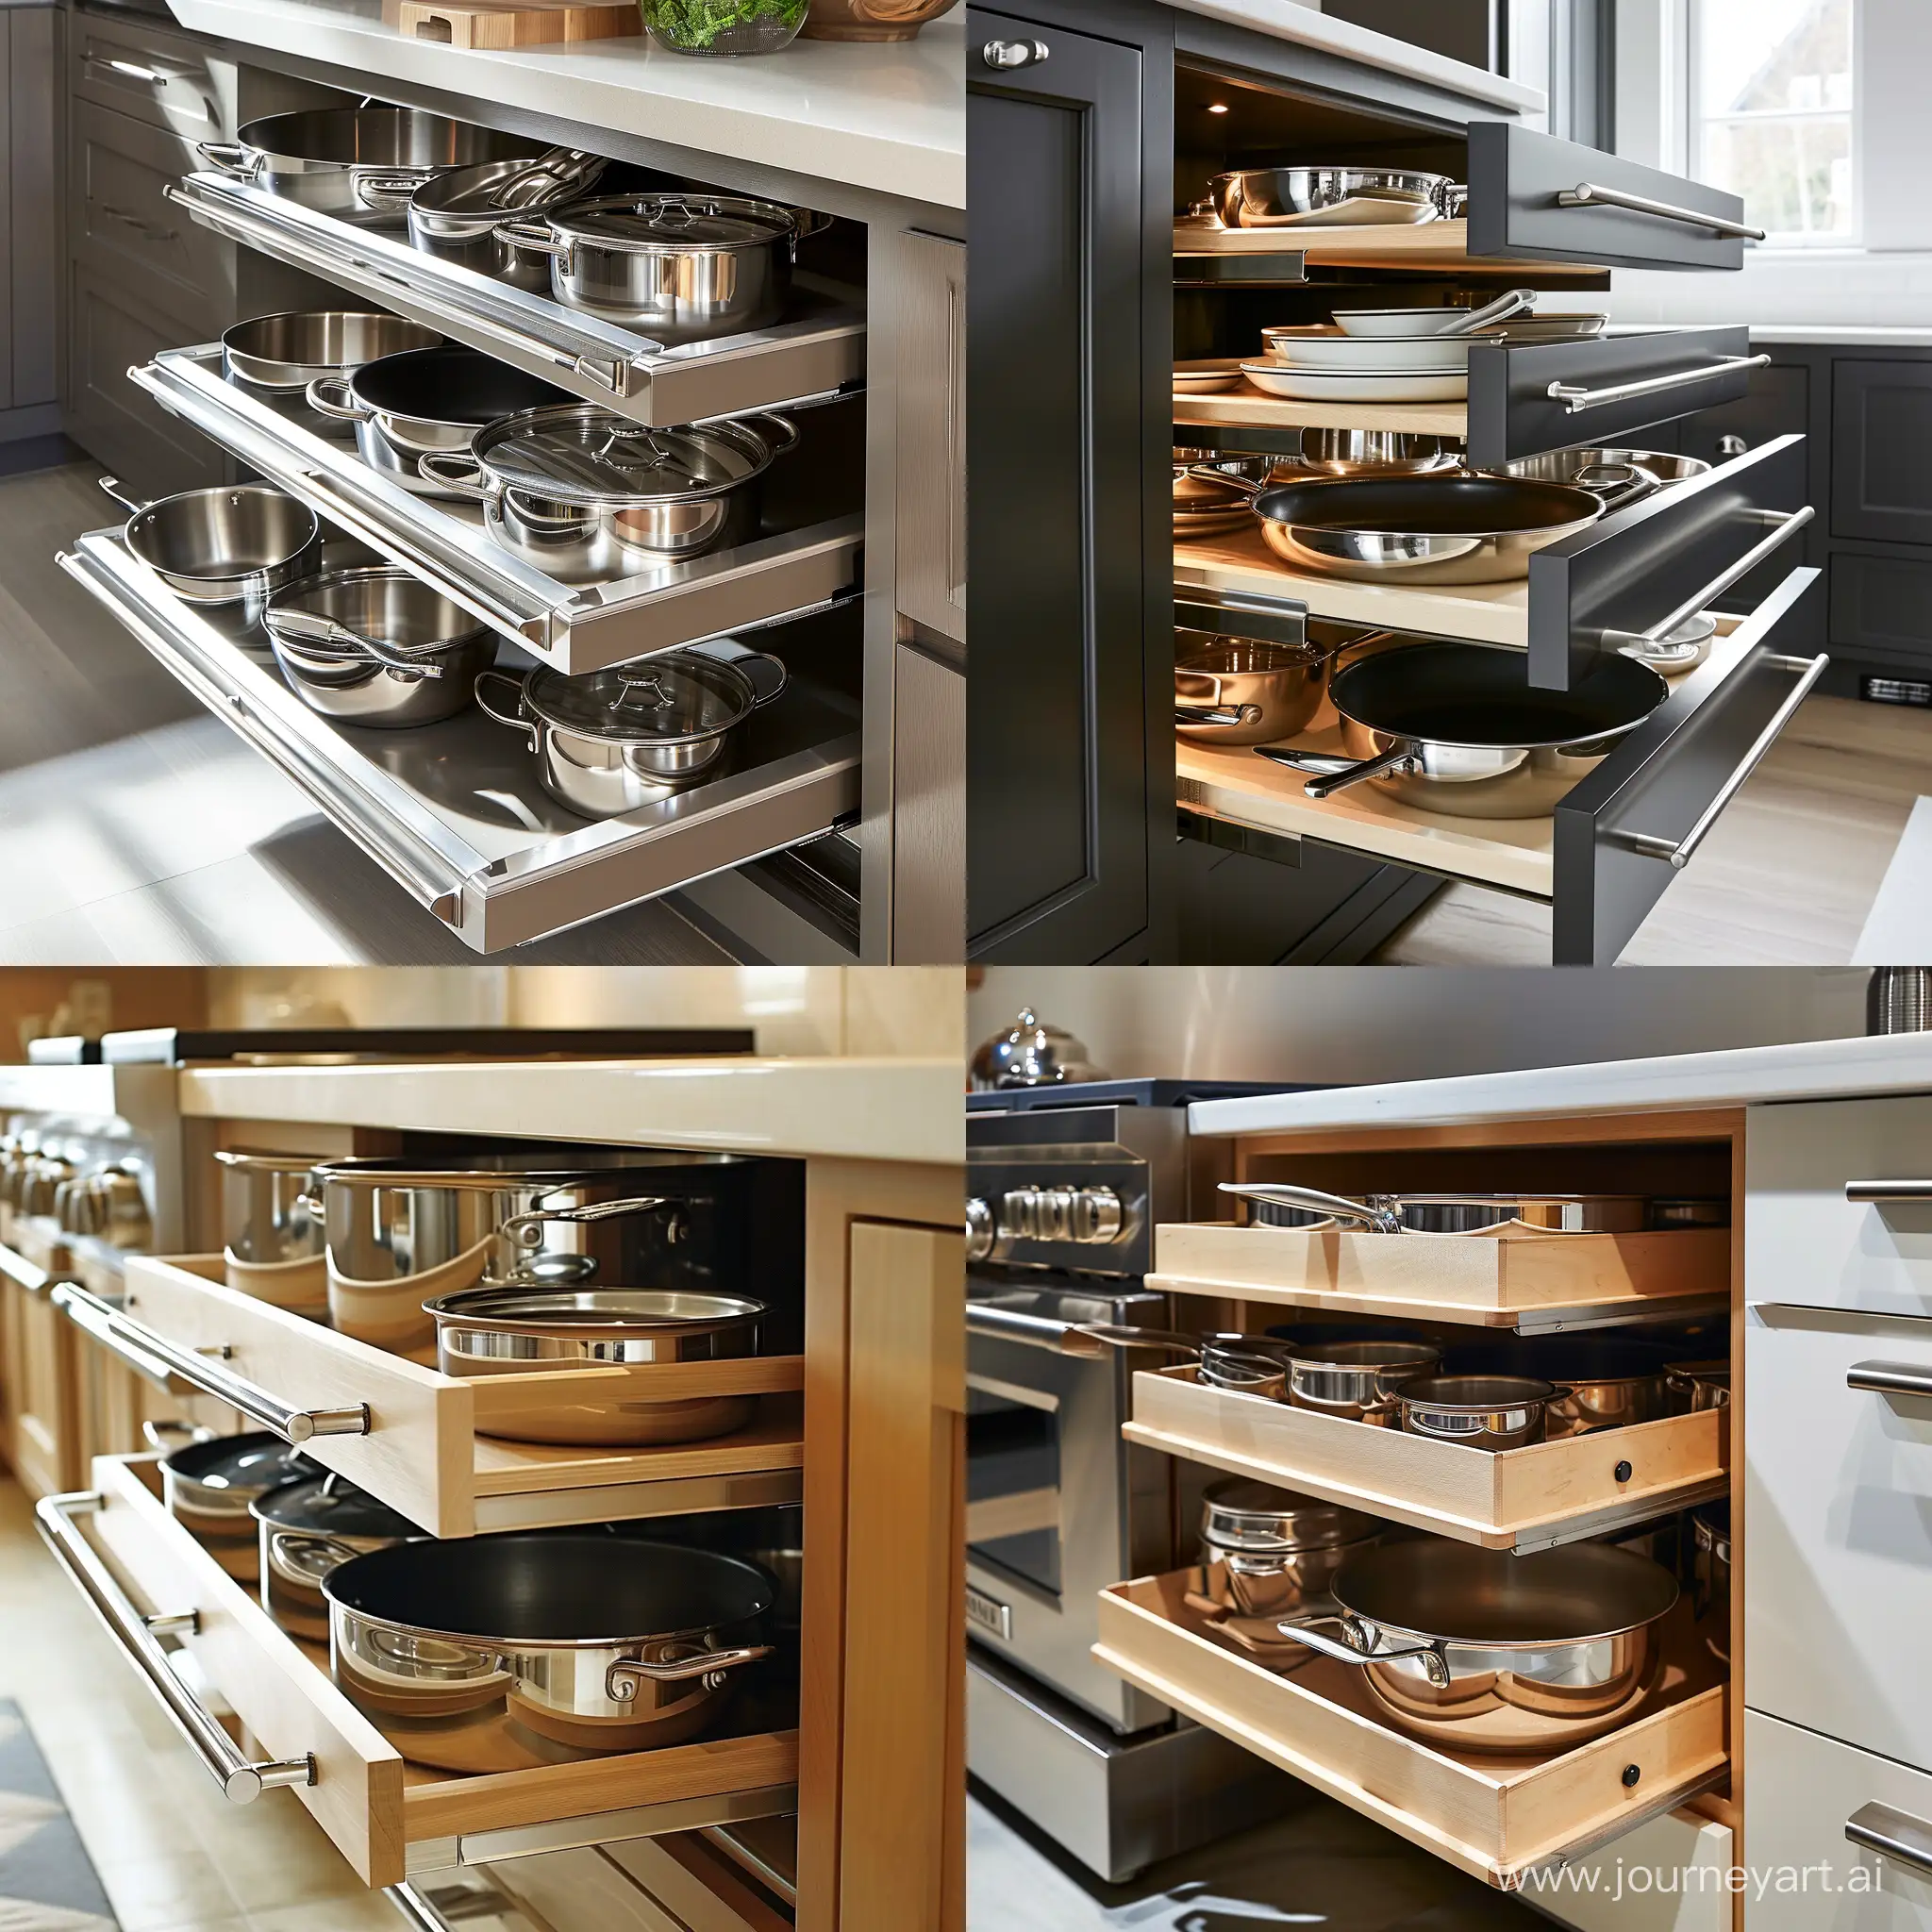 Glide-out Shelves for Pans and Pots